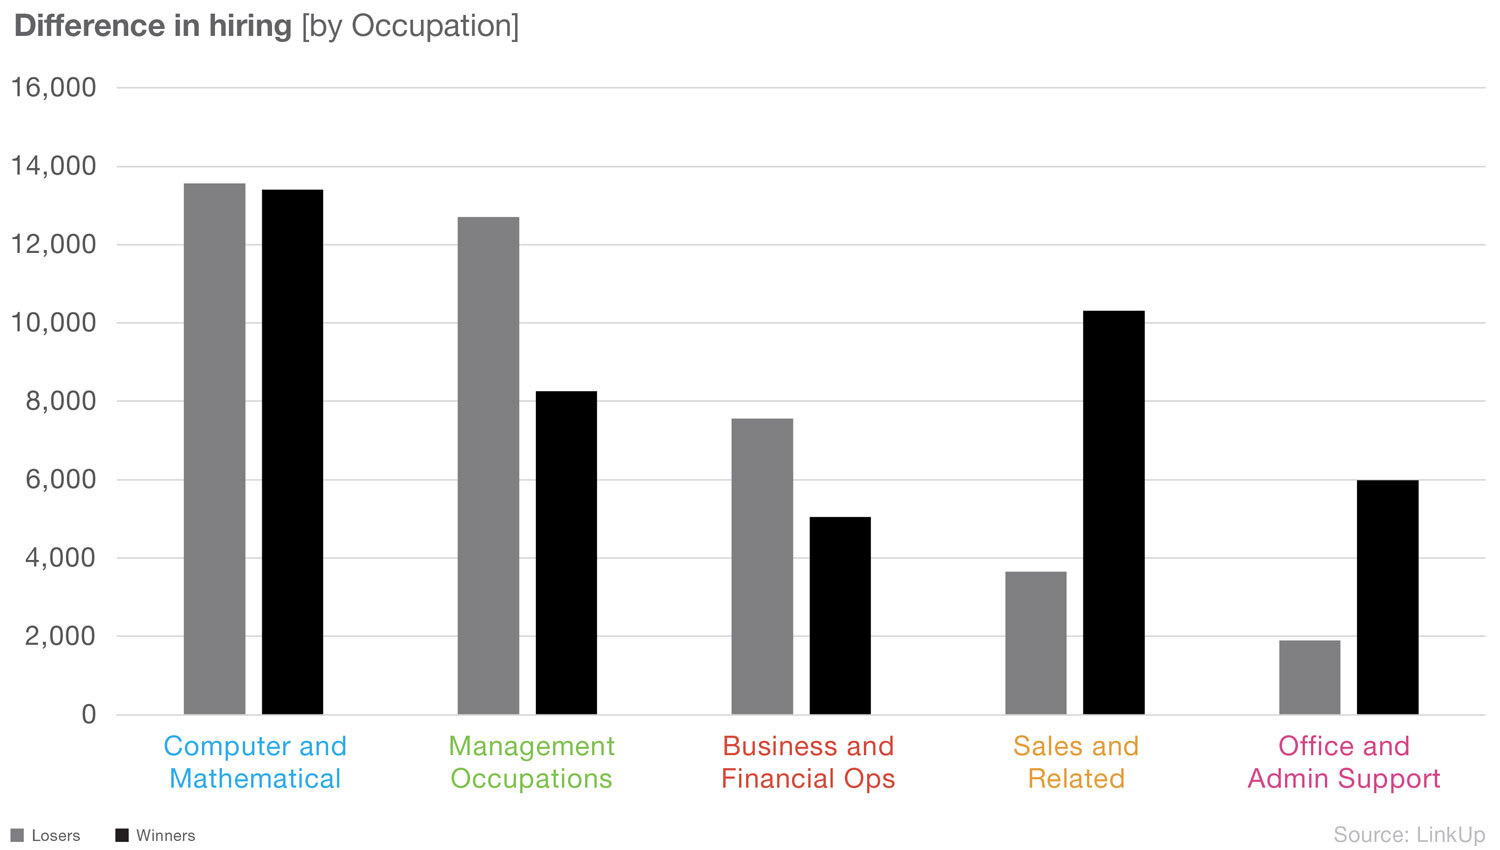 Difference in hiring by occupation